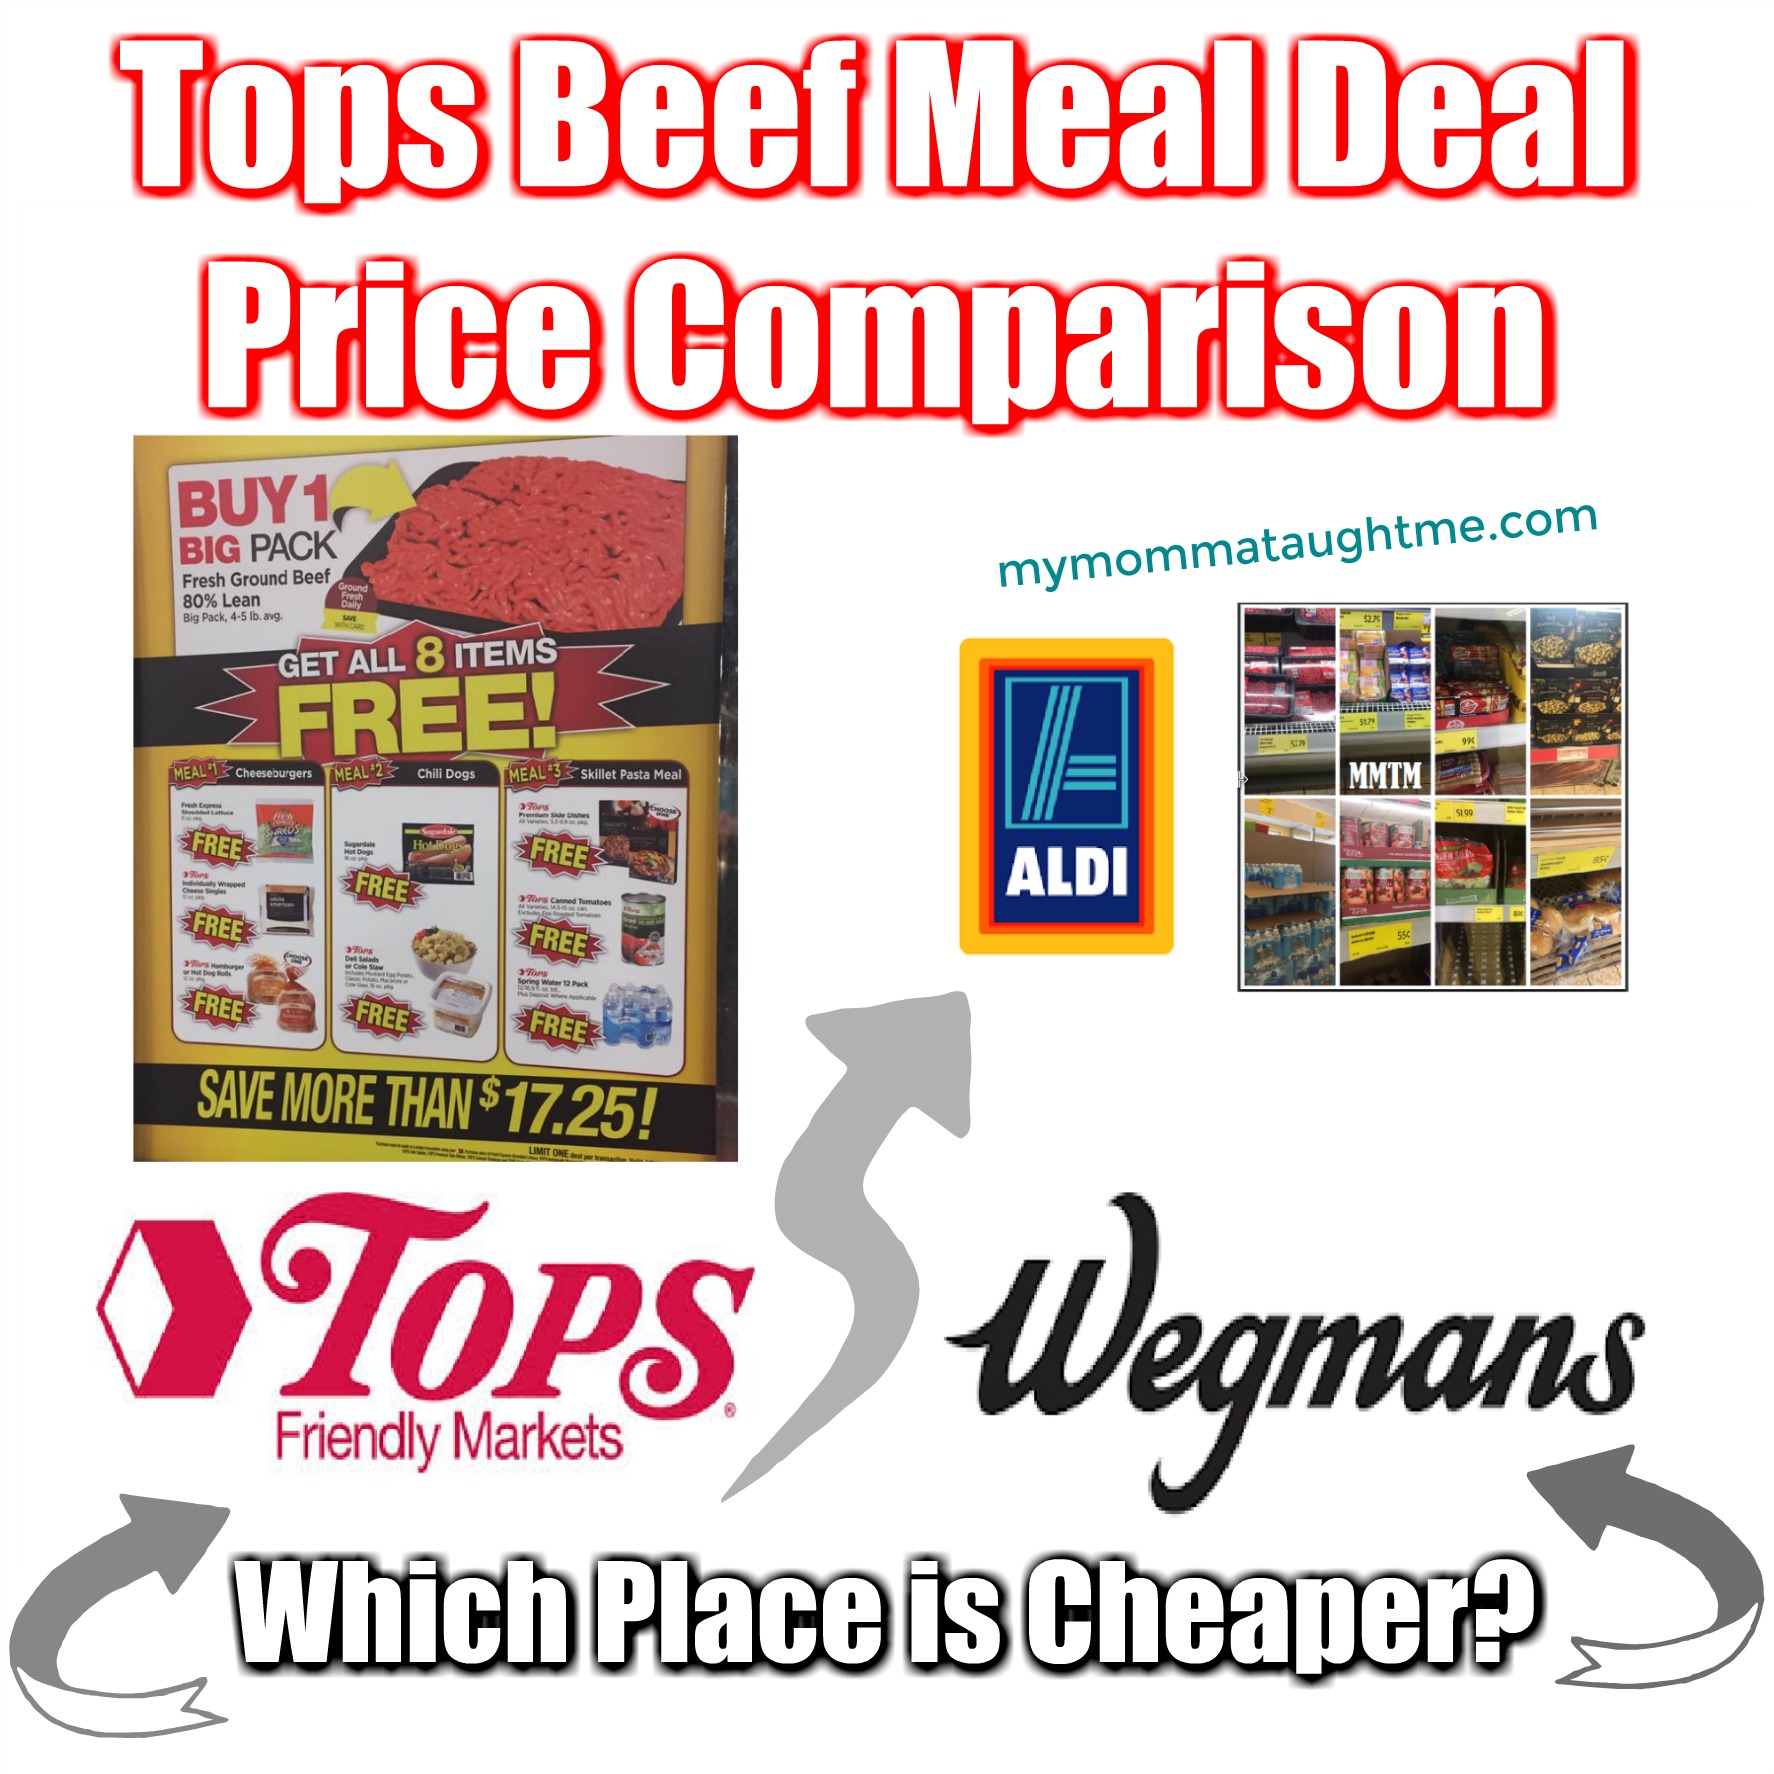 Tops Beef Meal Deal Price Comparisons